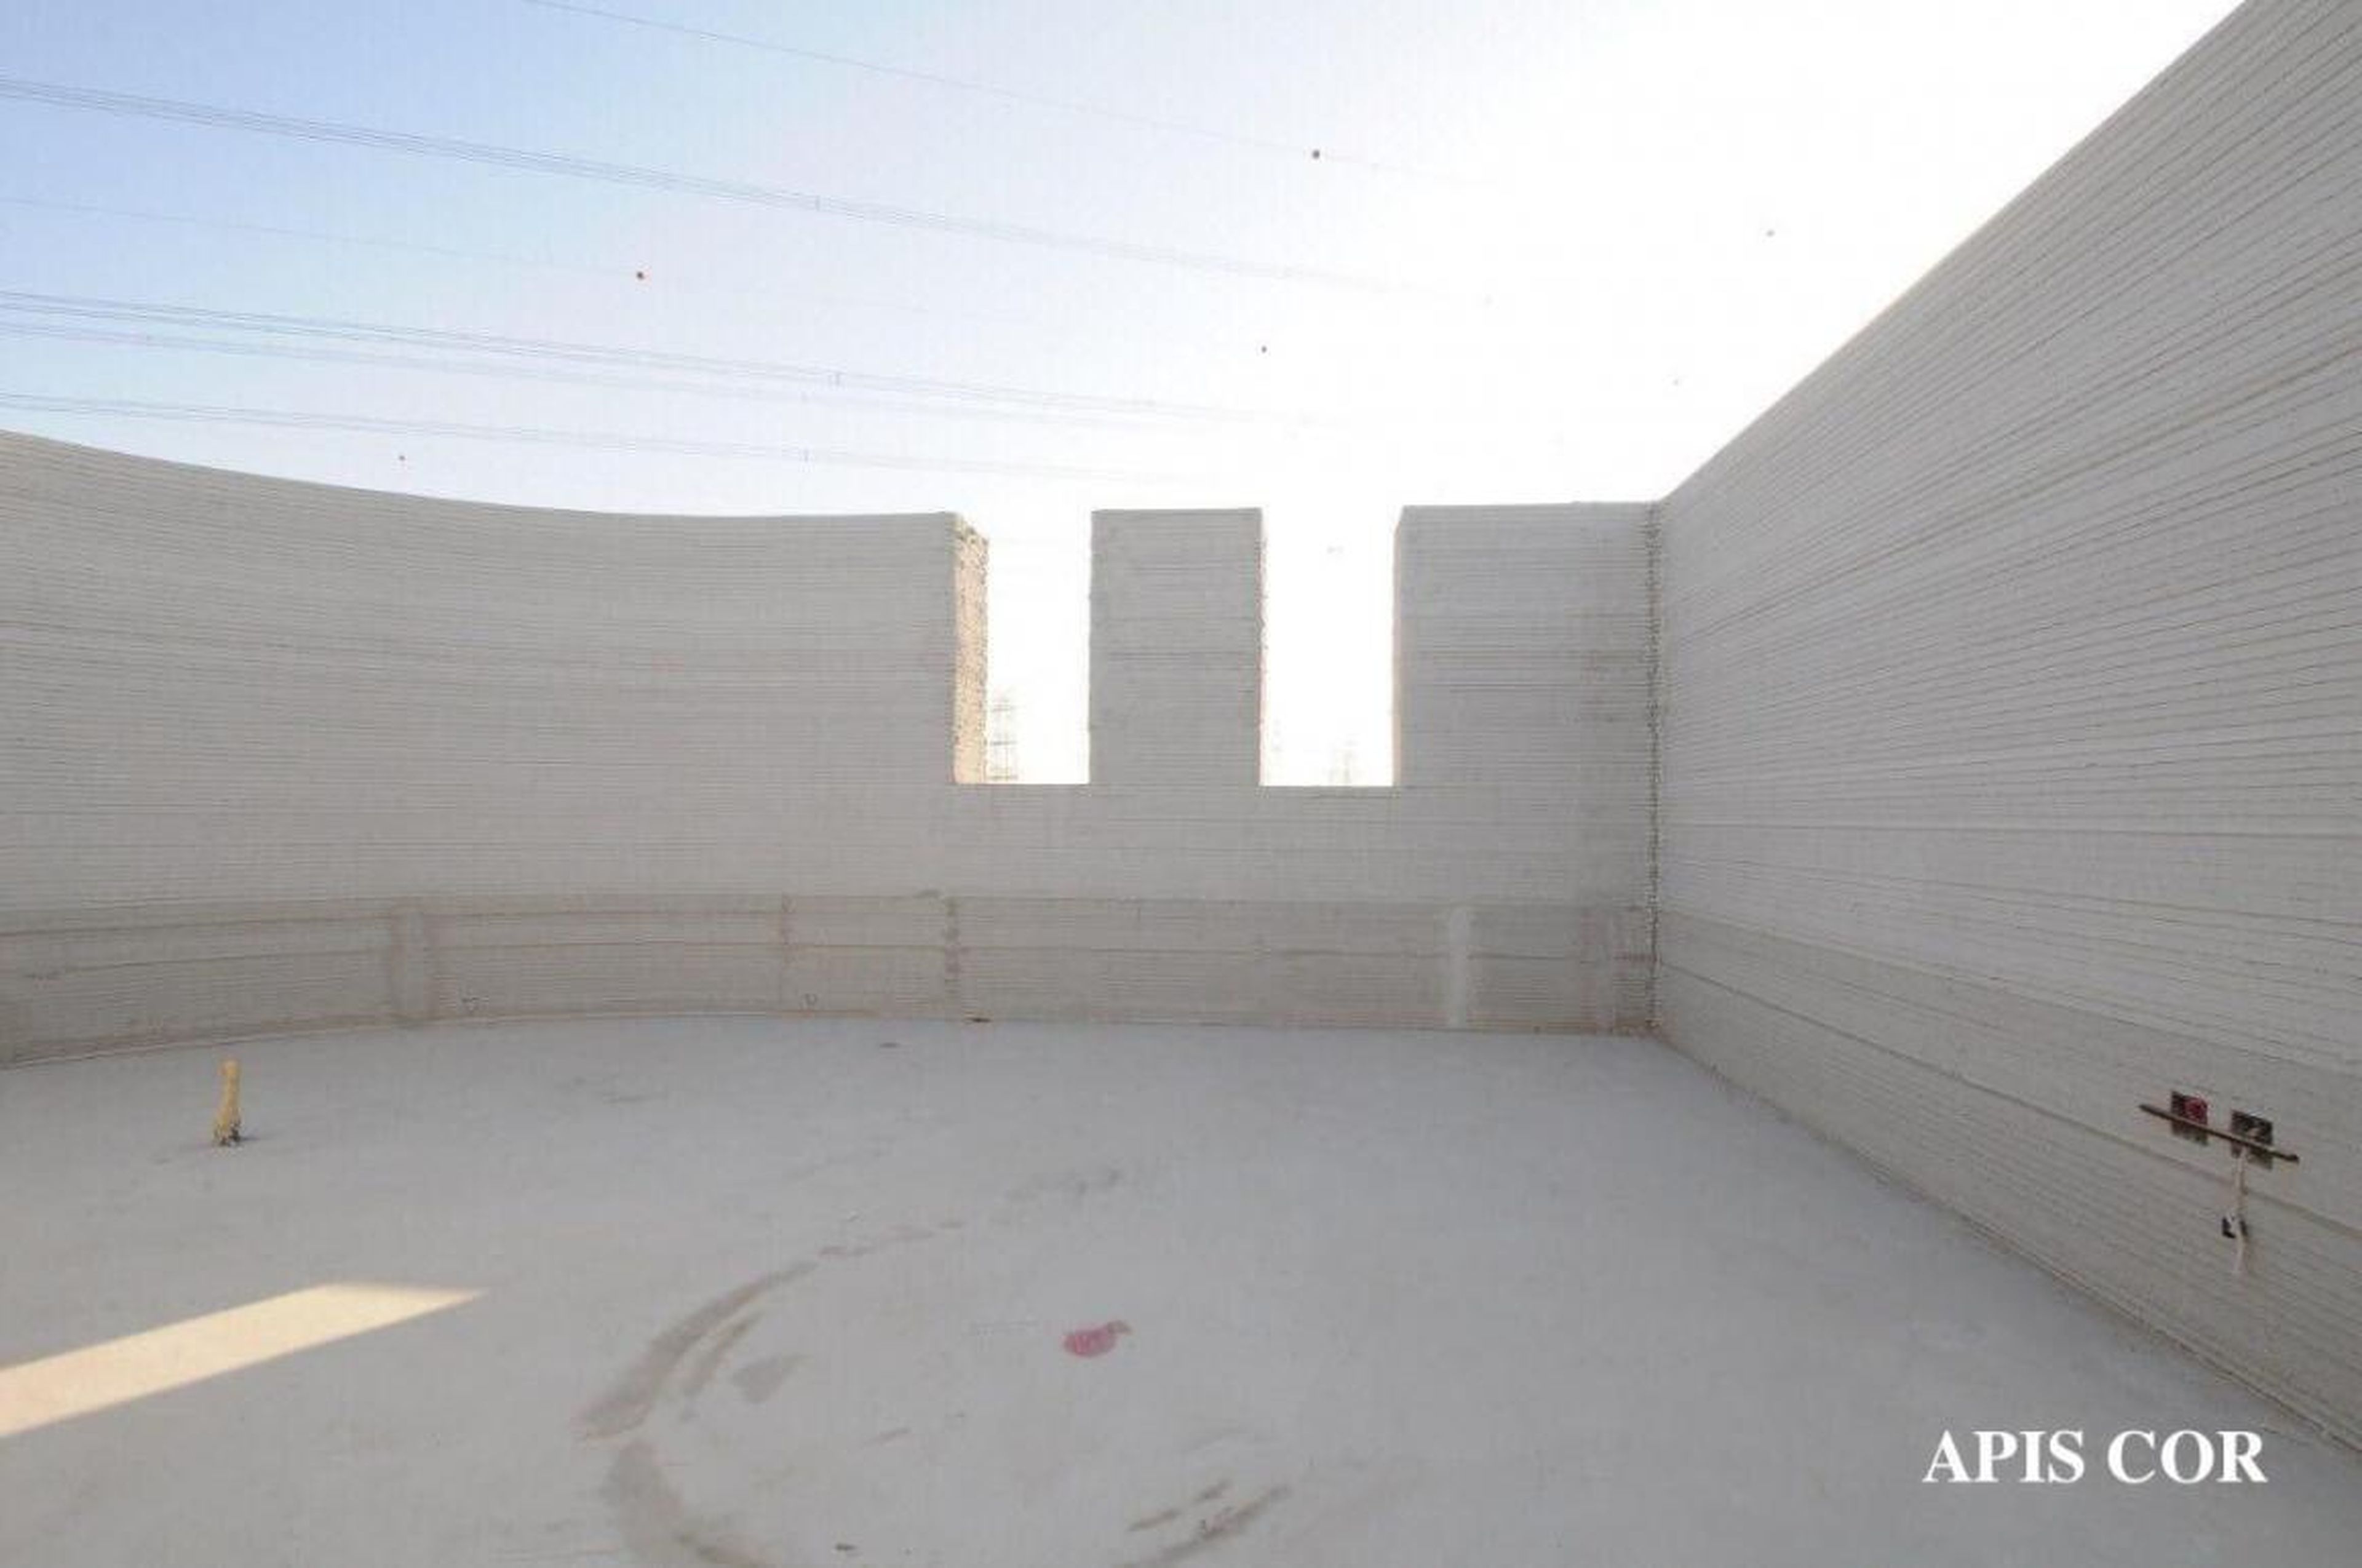 Now, the city is also home to the world's largest 3D-printed building.